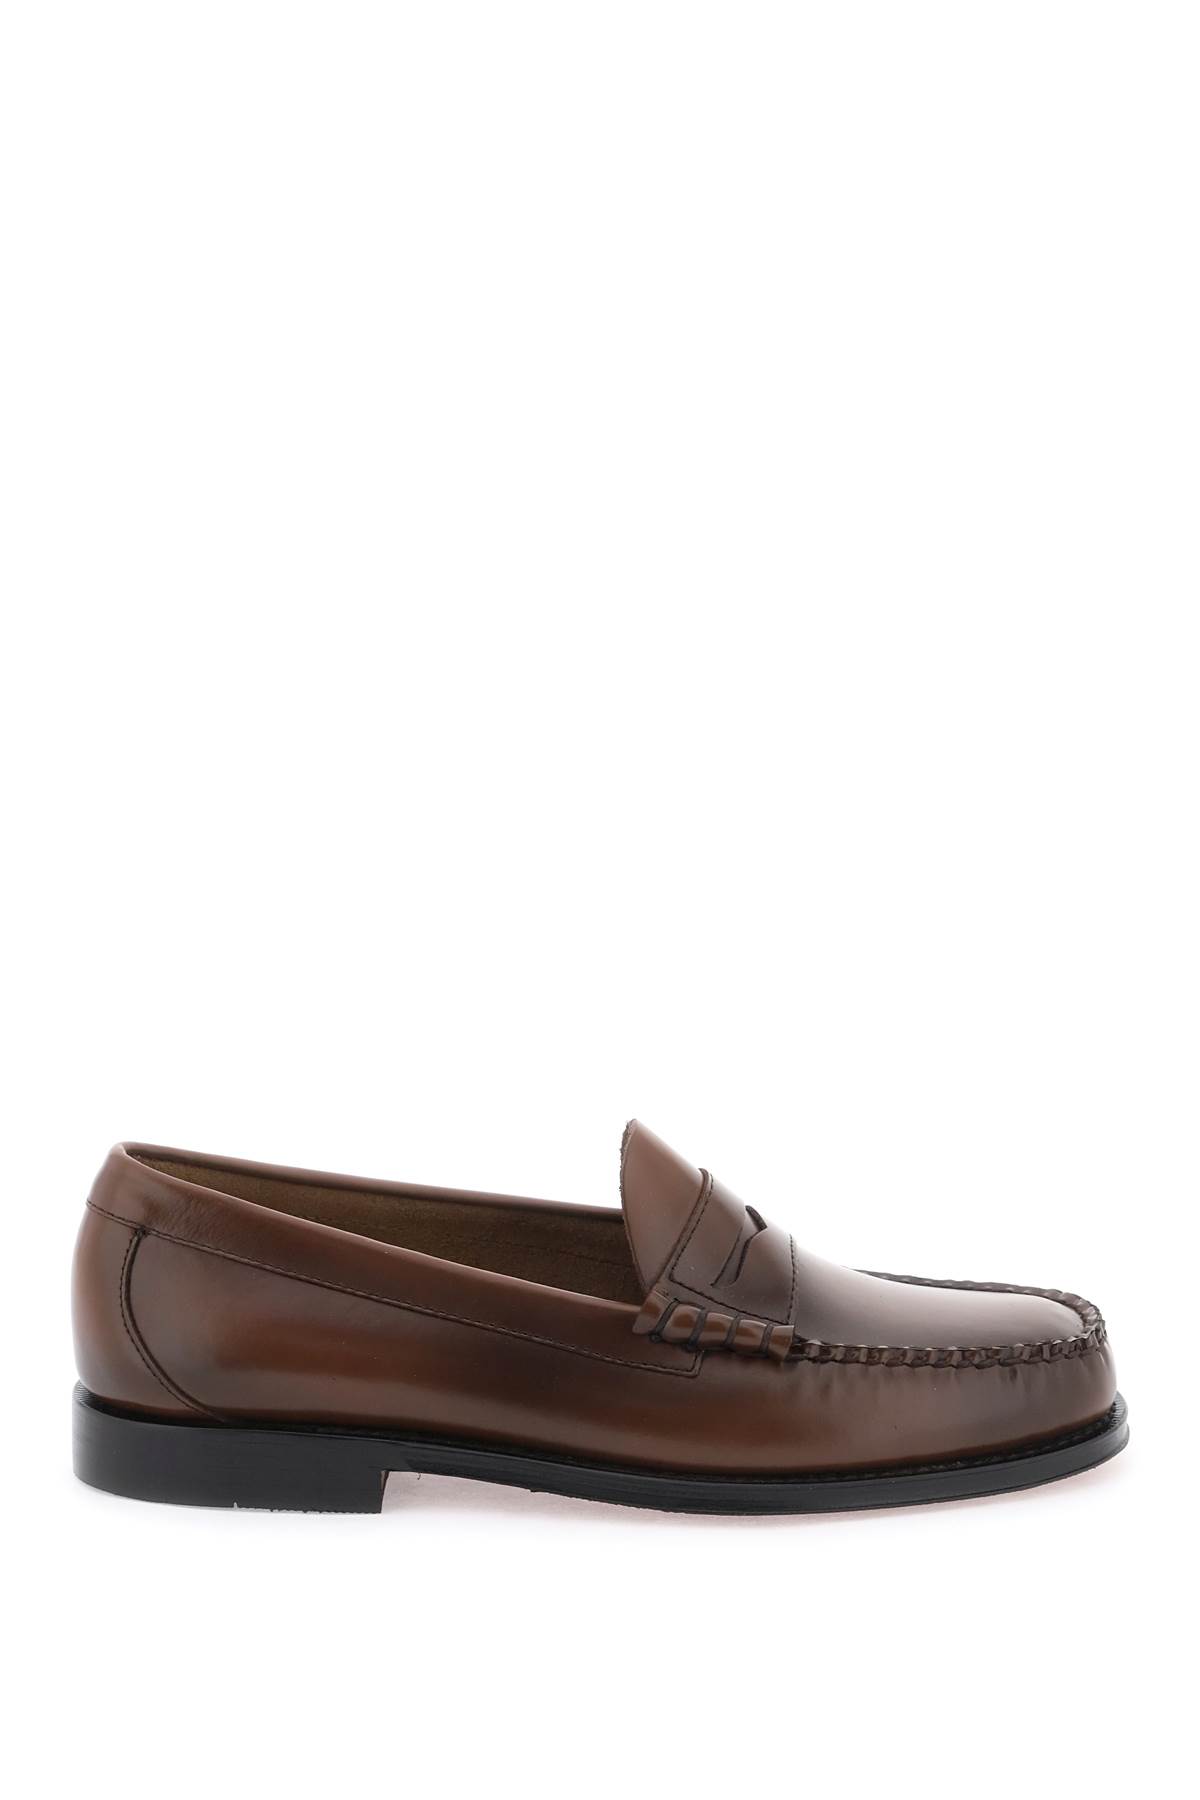 G.H.Bass & Co. Weejuns Larson Penny Loafers